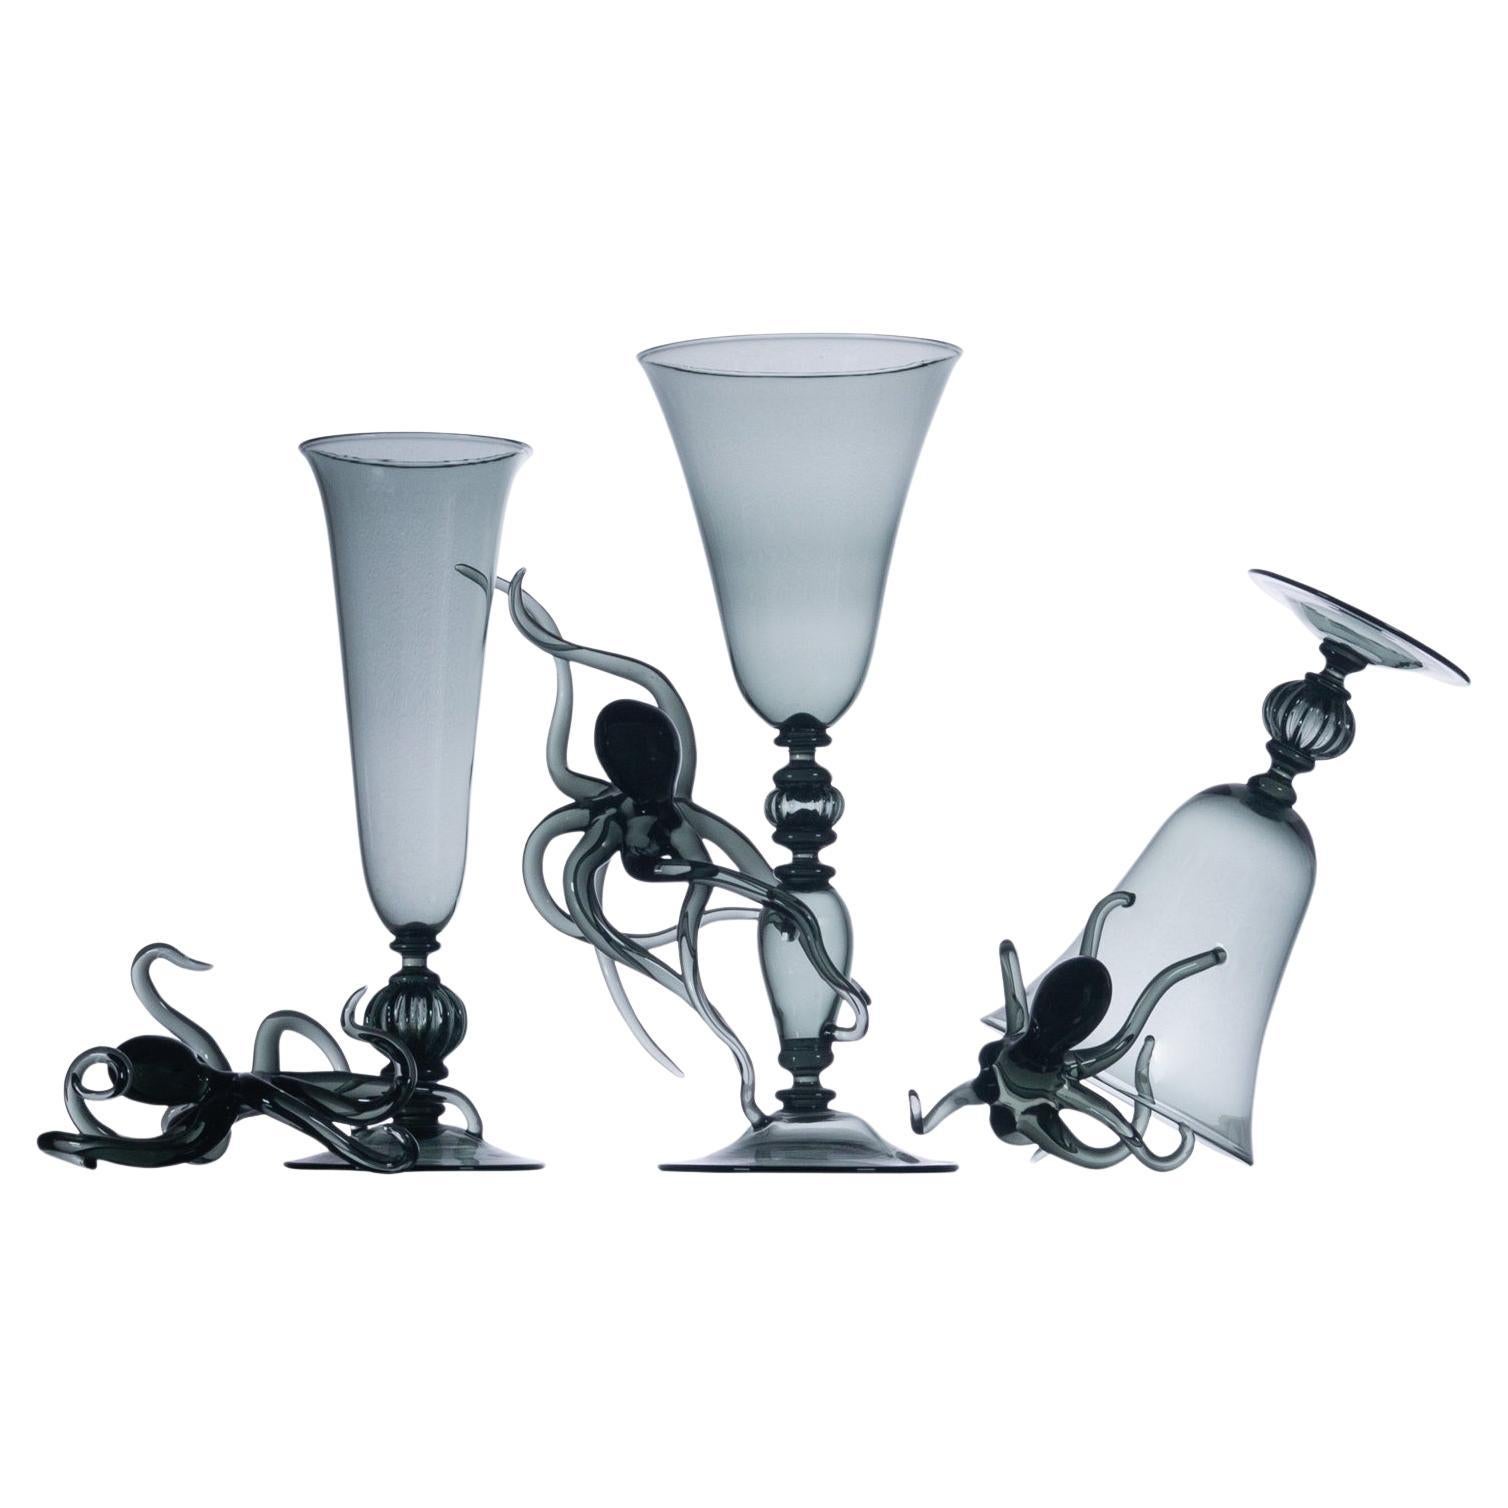 Contemporary Ironia Hand Blown Black Glass Sculptured Goblets and Flute Set